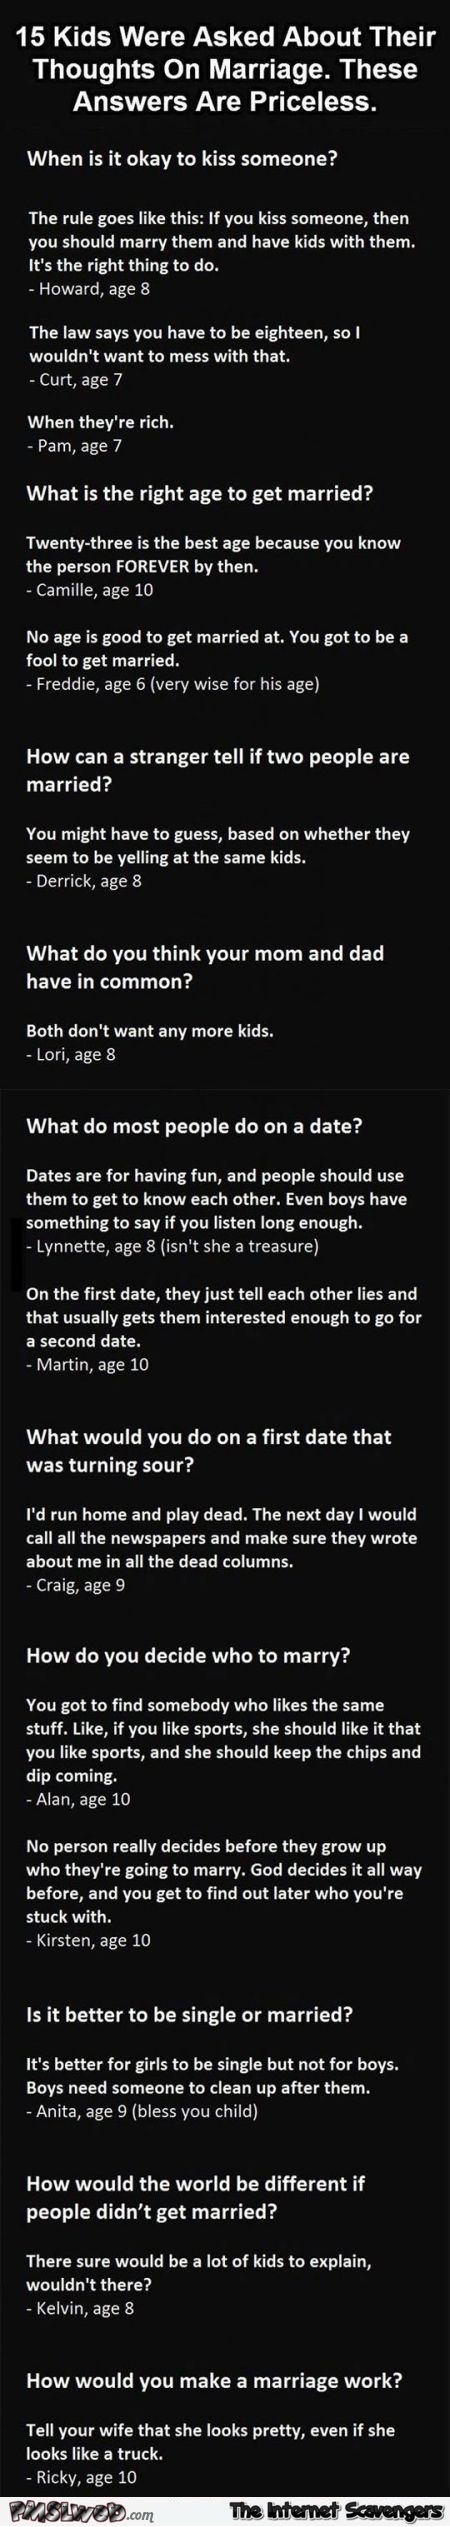 Hilarious kid’s thoughts about marriage @PMSLweb.com